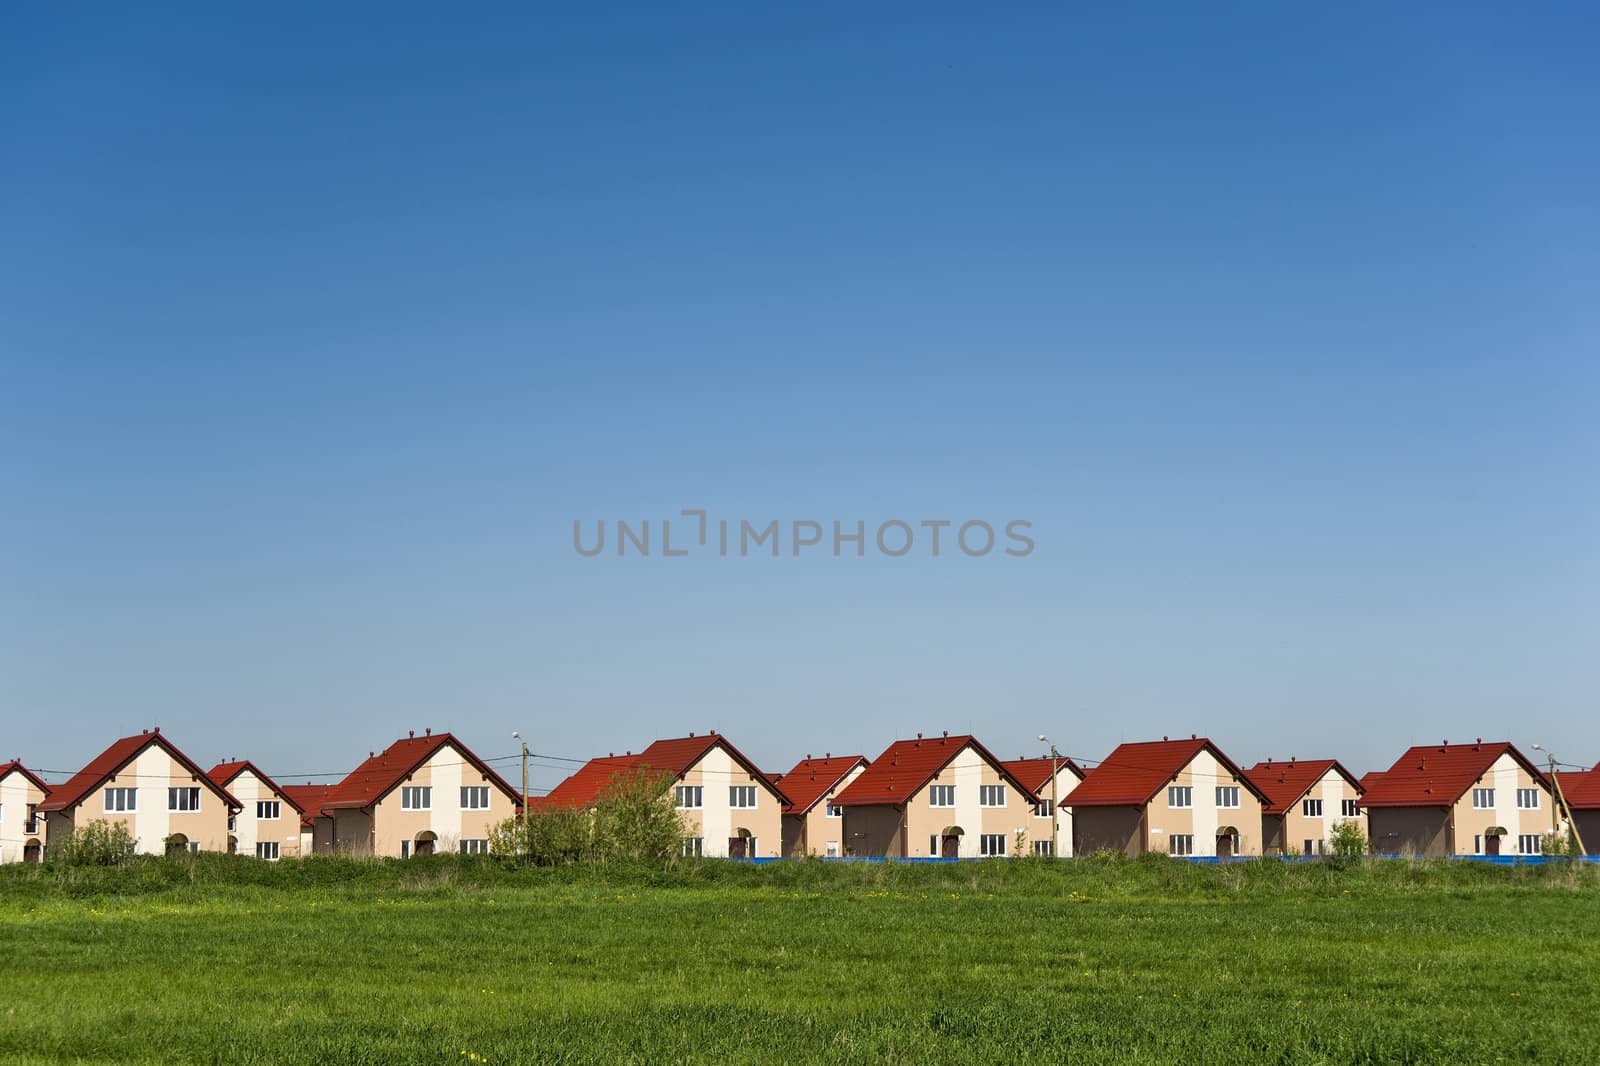 New cottages and blue sky background by mulden